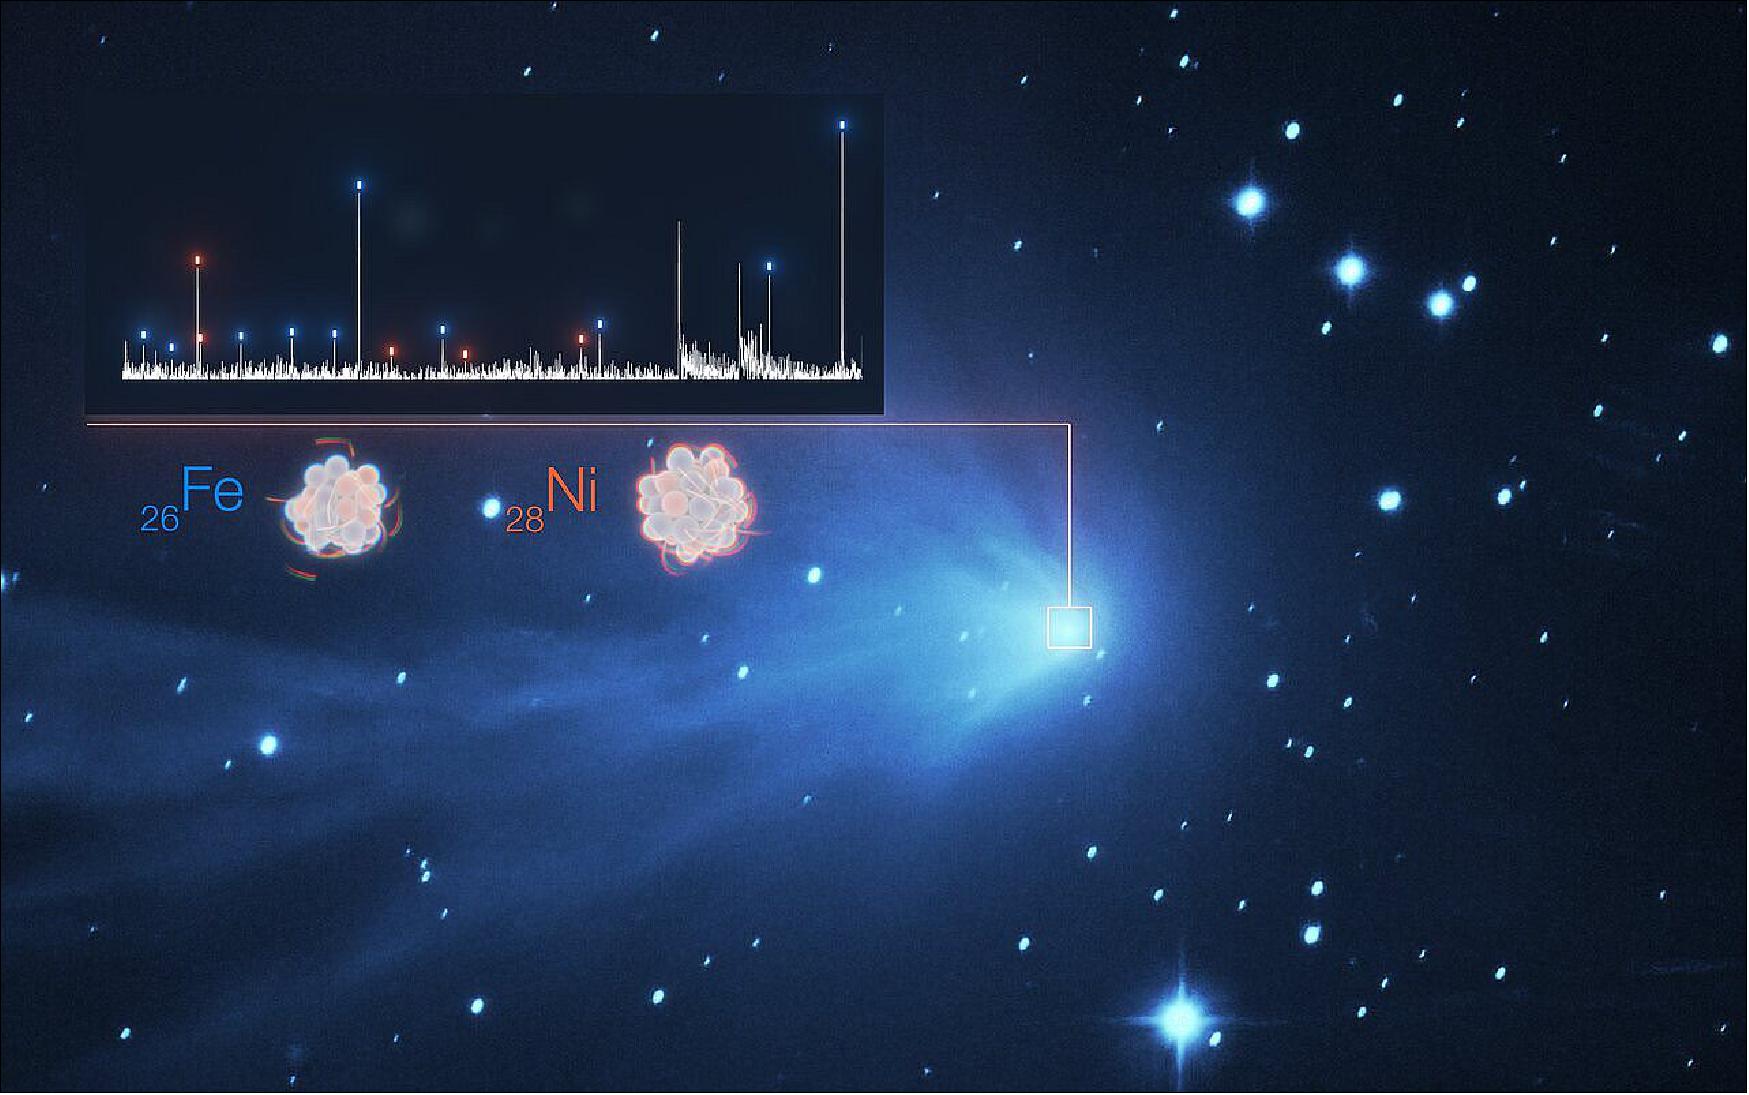 Figure 22: The detection of the heavy metals iron (Fe) and nickel (Ni) in the fuzzy atmosphere of a comet are illustrated in this image, which features the spectrum of light of C/2016 R2 (PANSTARRS) on the top left superimposed to a real image of the comet taken with the SPECULOOS telescope at ESO’s Paranal Observatory. Each white peak in the spectrum represents a different element, with those for iron and nickel indicated by blue and orange dashes, respectively. Spectra like these are possible thanks to the UVES instrument on ESO’s VLT, a high-resolution spectrograph that spreads the line so much they can be individually identified. In addition, UVES remains sensitive down to wavelengths of 300nm. Most of the important iron and nickel lines appear at wavelengths of around 350nm, meaning that the capabilities of UVES were essential in making this discovery. (image credit: ESO/L. Calçada, SPECULOOS Team/E. Jehin, Manfroid et al.)